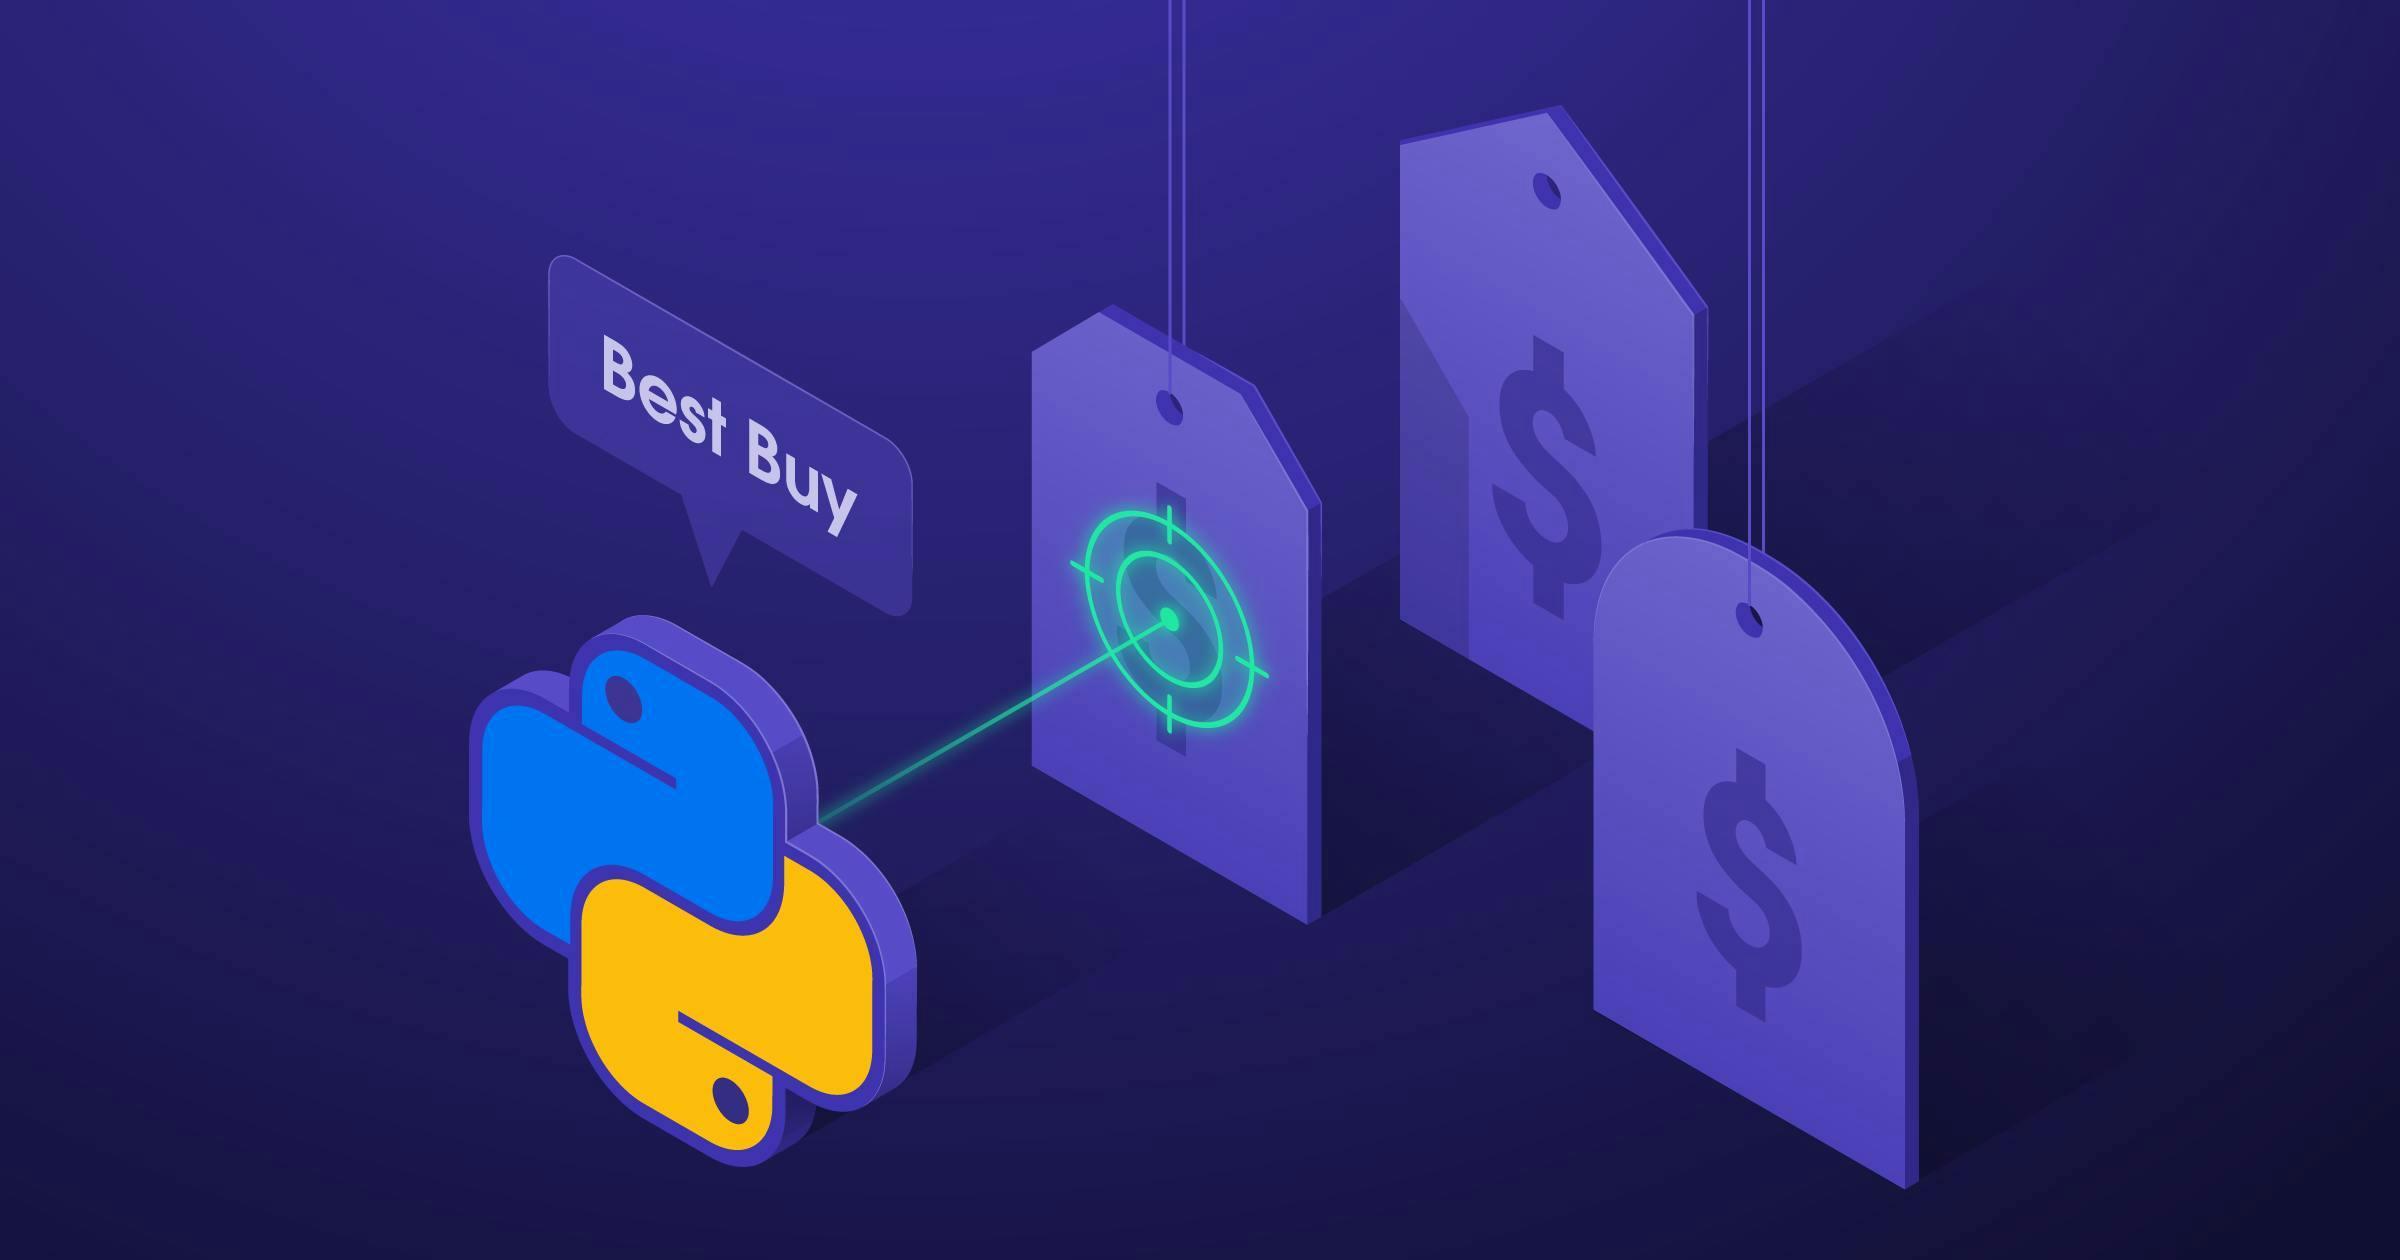 How to Make Best Buy Price Tracker With Python